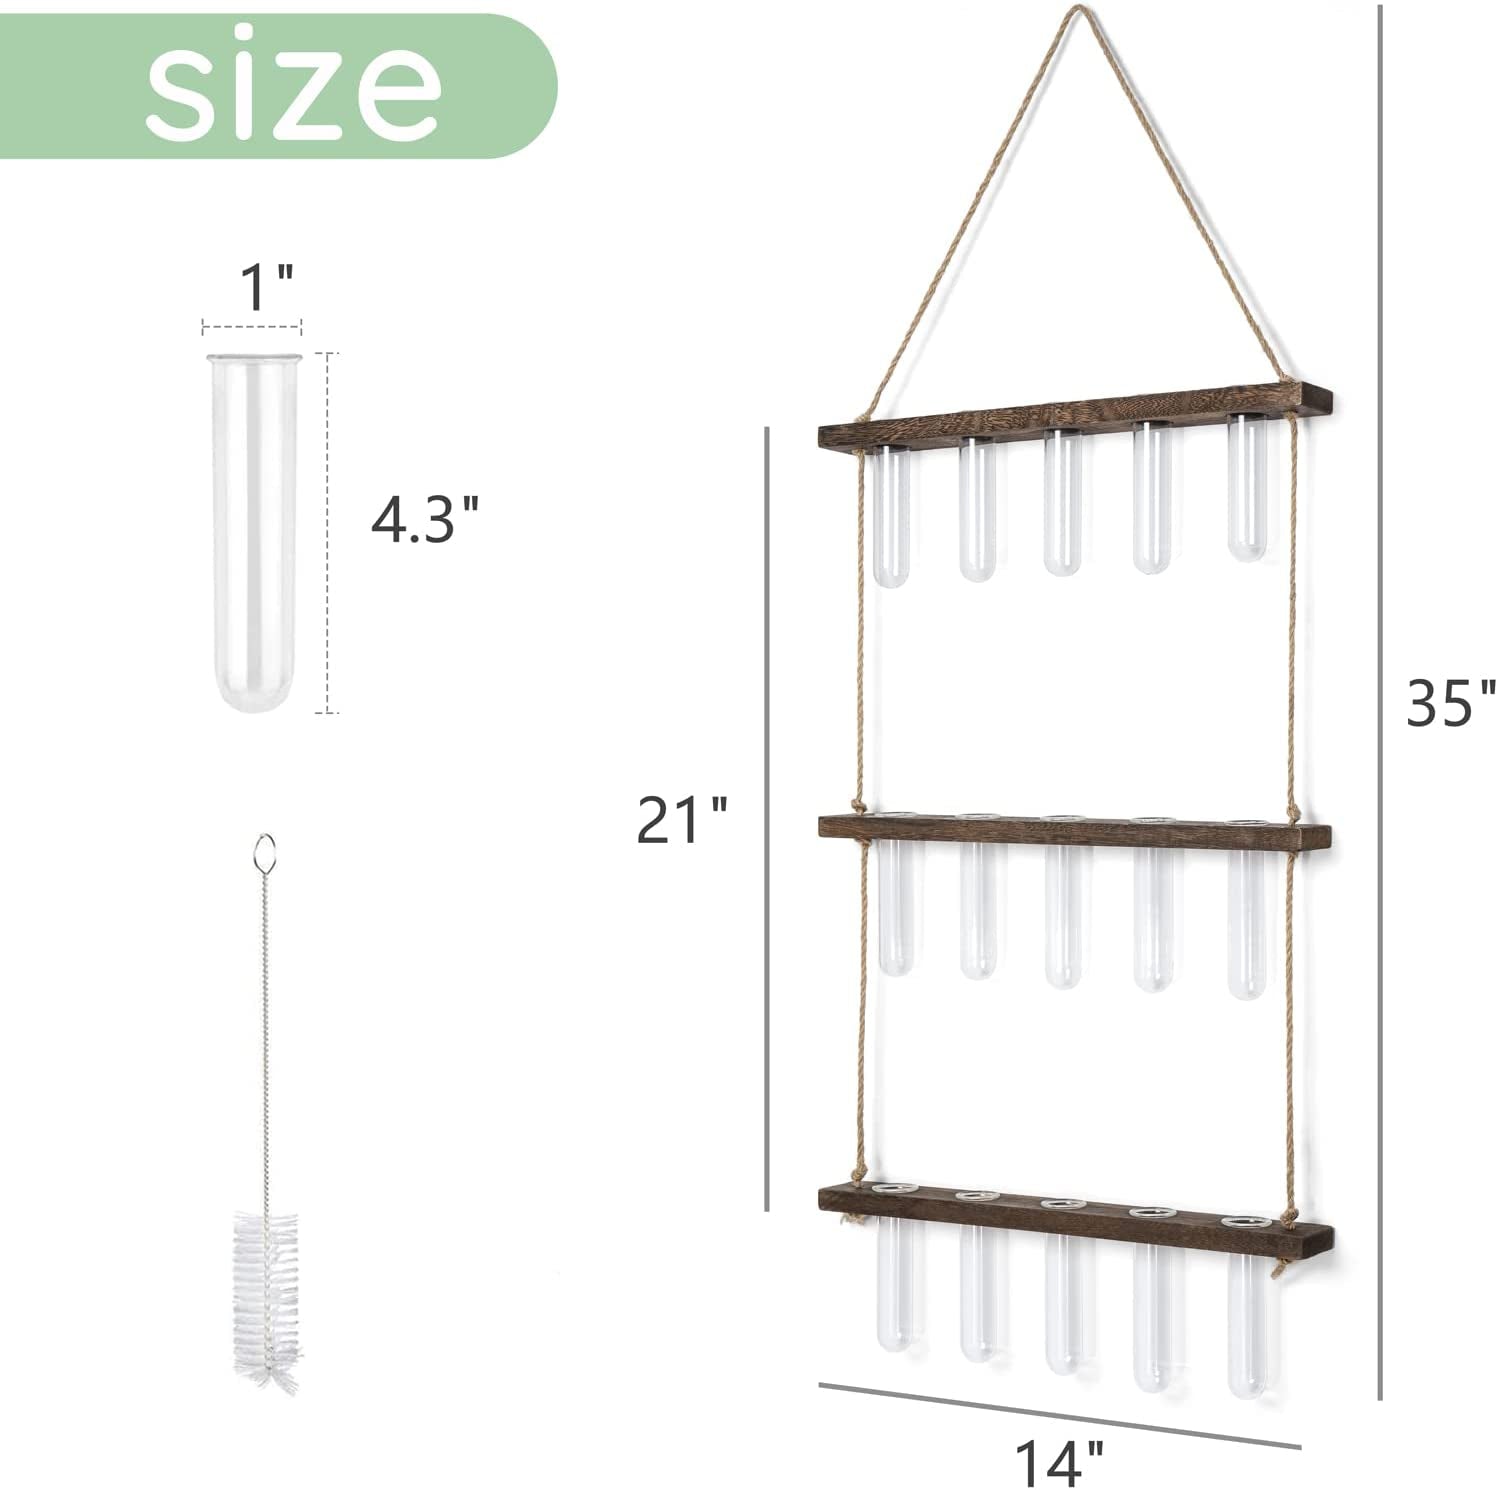 Plant Propagation Tubes, 3 Tiered Wall Hanging Terrarium with Wooden Stand Mini Test Tube Flower Vase Glass Planter Stations for Hydroponic Cutting Home Garden Office Decor Plant Lover Gift